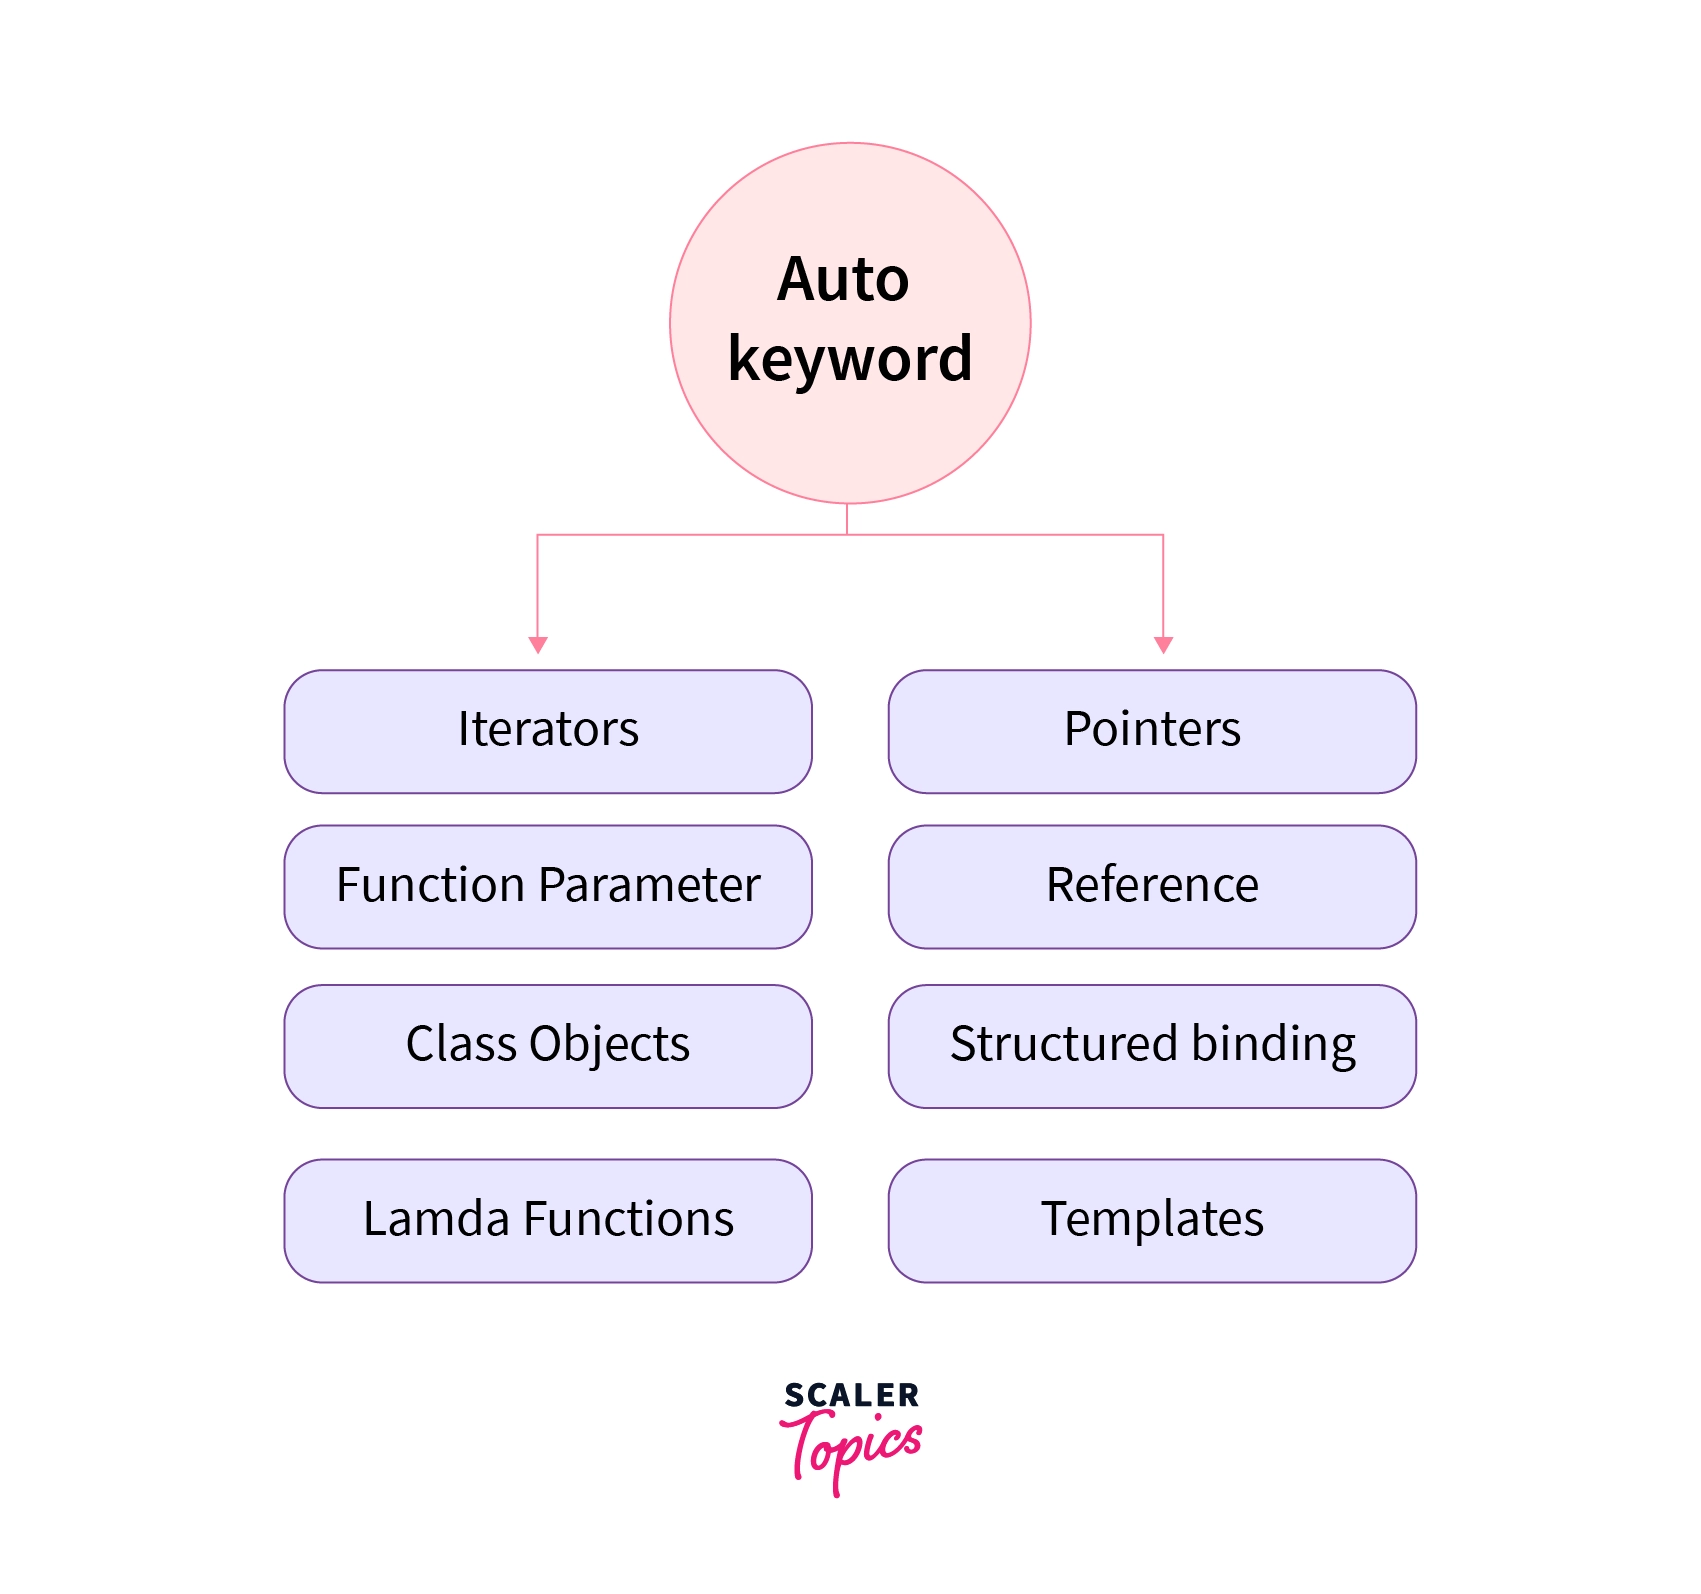 Uses of Auto in C++